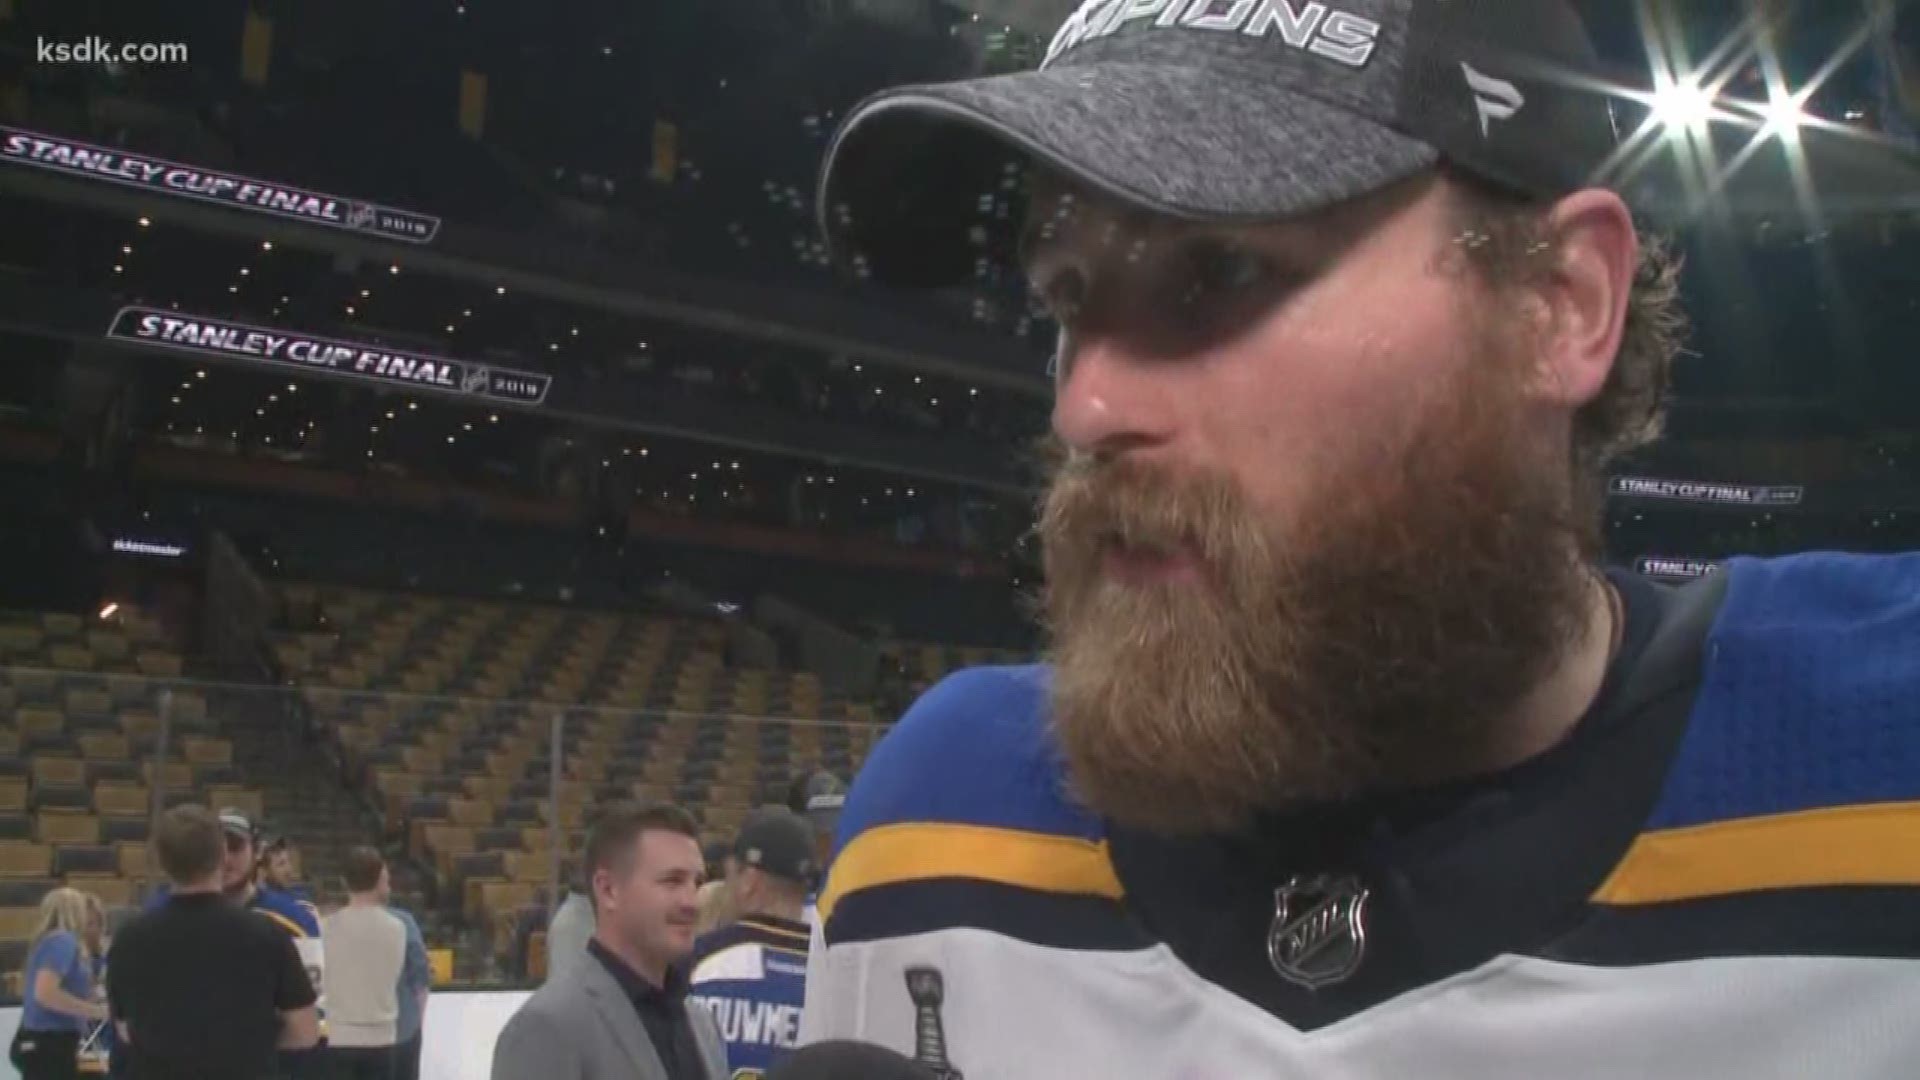 After growing up idolizing the winners of the Conn Smythe Trophy, Ryan O'Reilly is on one of the most historic trophies in the sport.